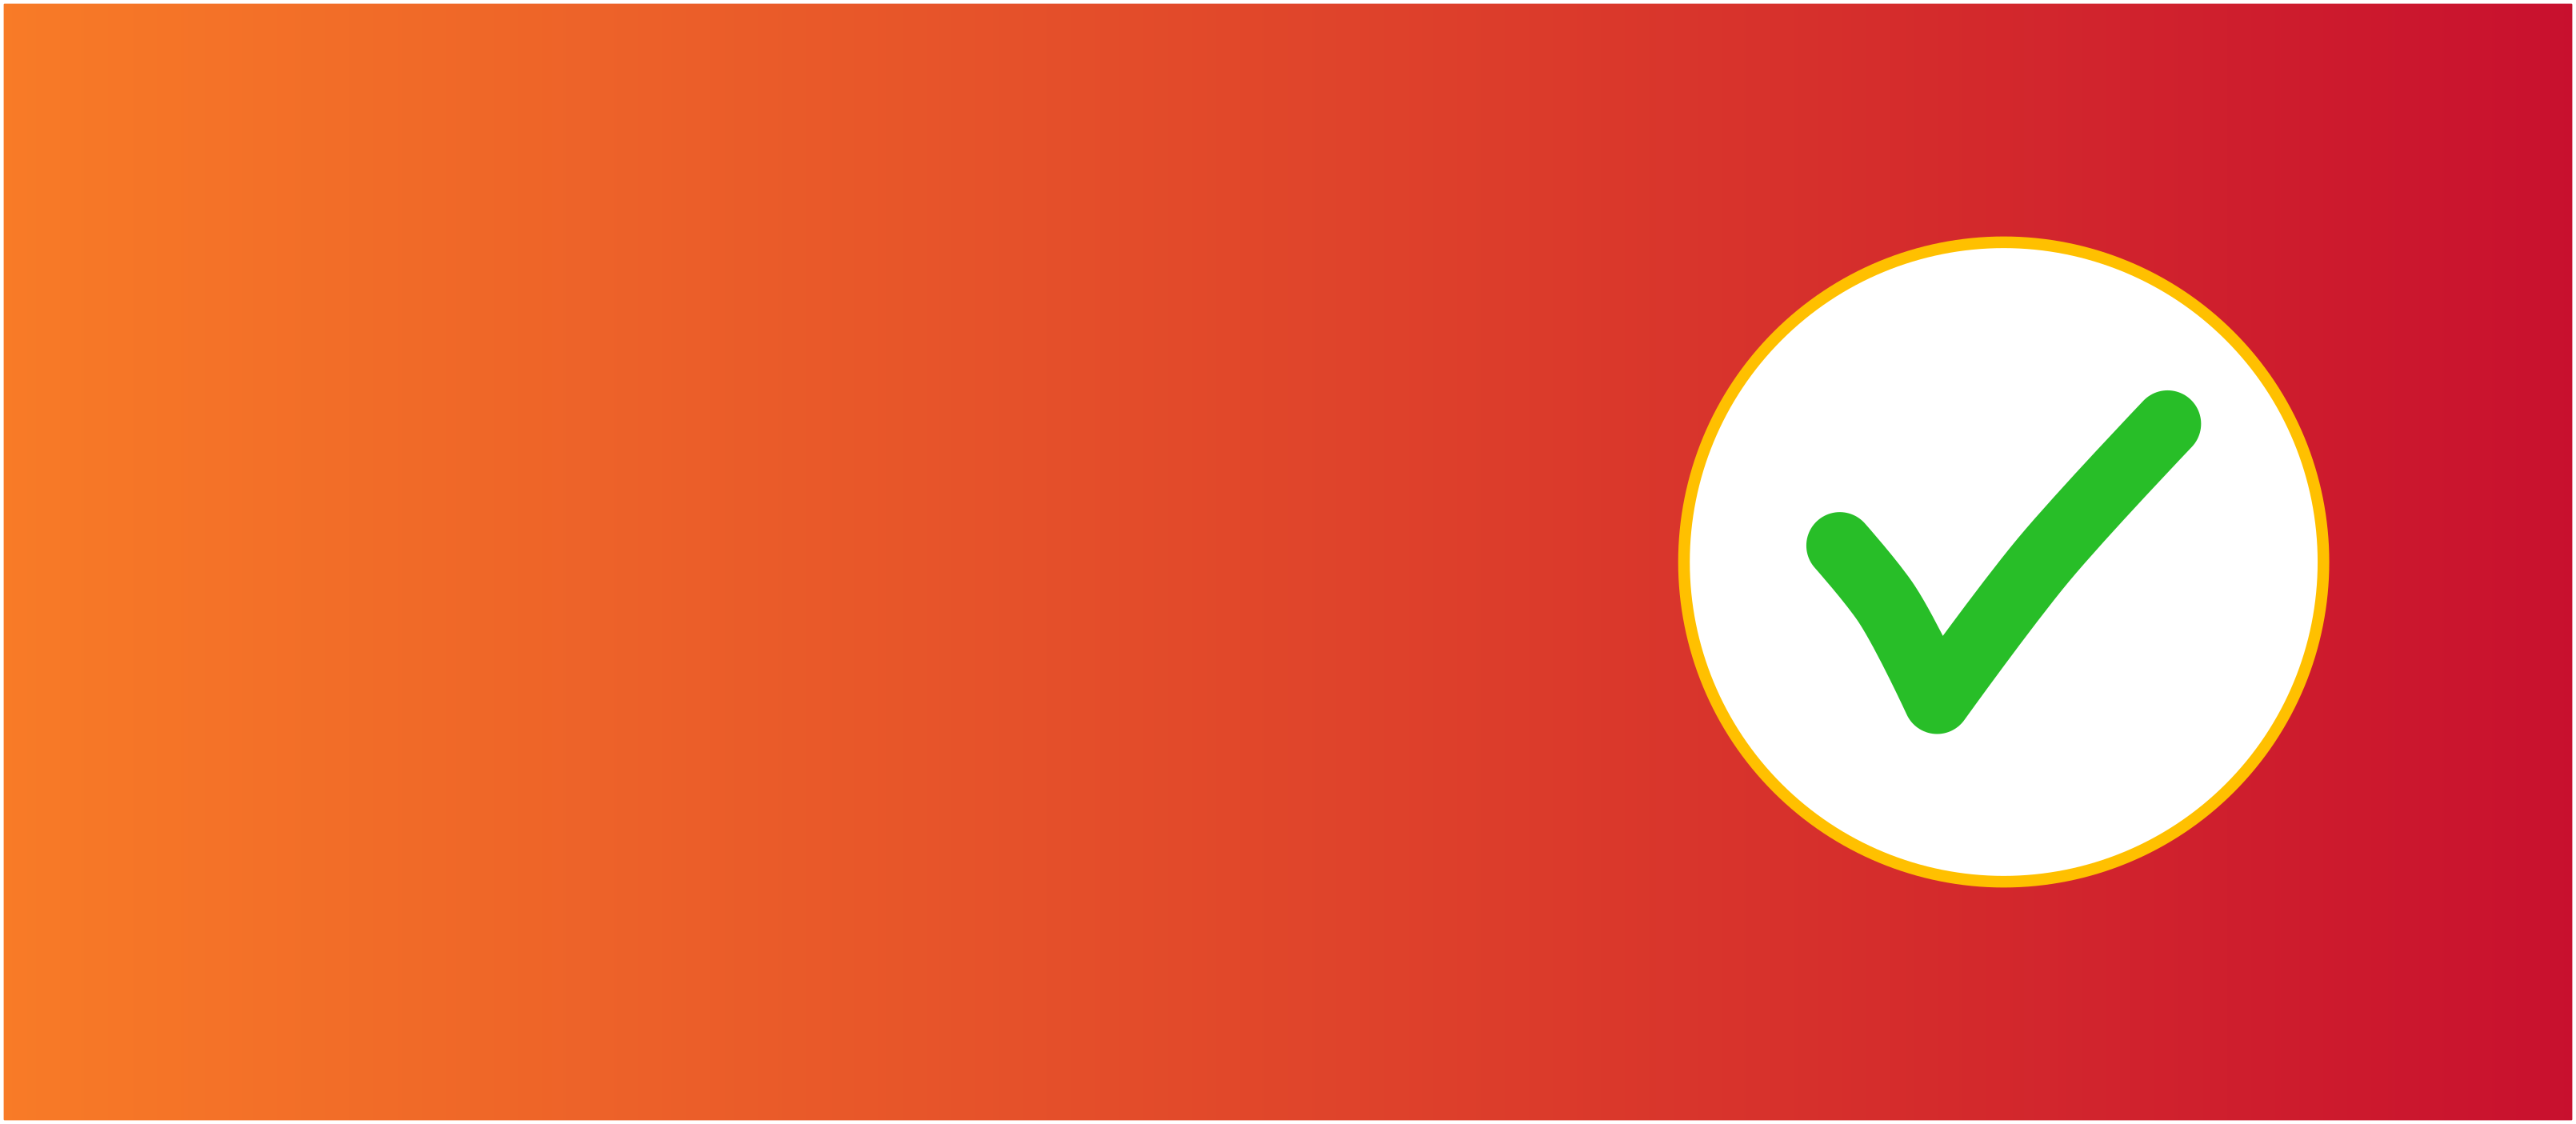 Icon of a green tick mark on a background of orange-to-red gradient